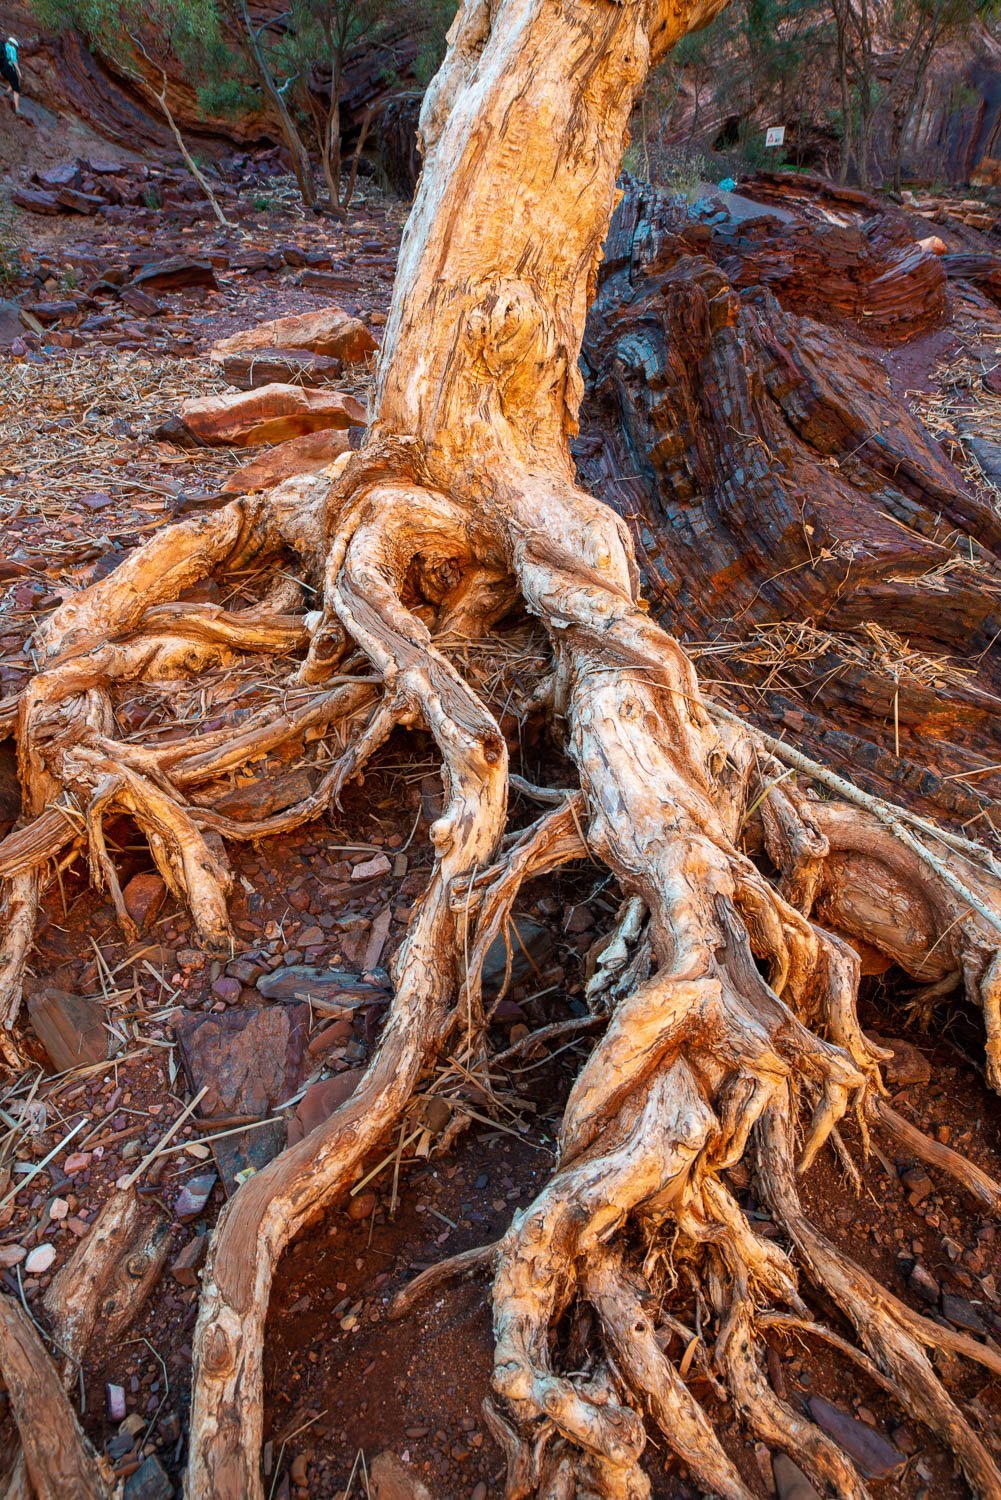 Long roots of a tree knotting around 